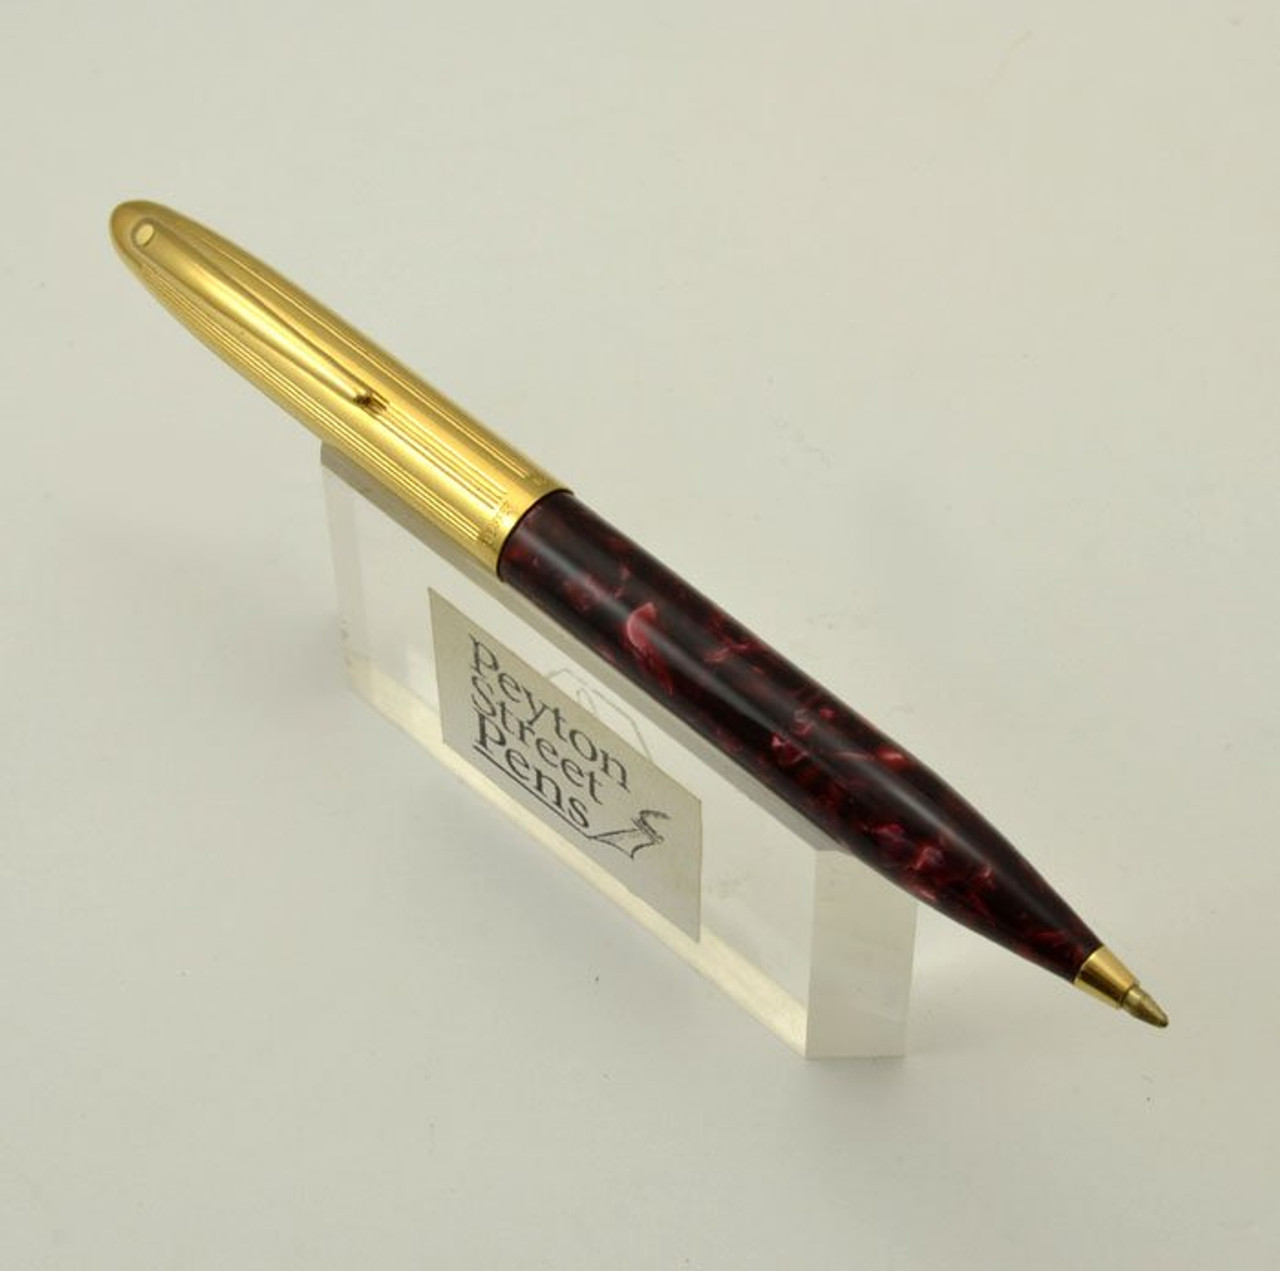 Sheaffer Crest (Reissue) Ballpoint Pen - Red Opalite w Non-Production Gold Cap (Pre-owned)